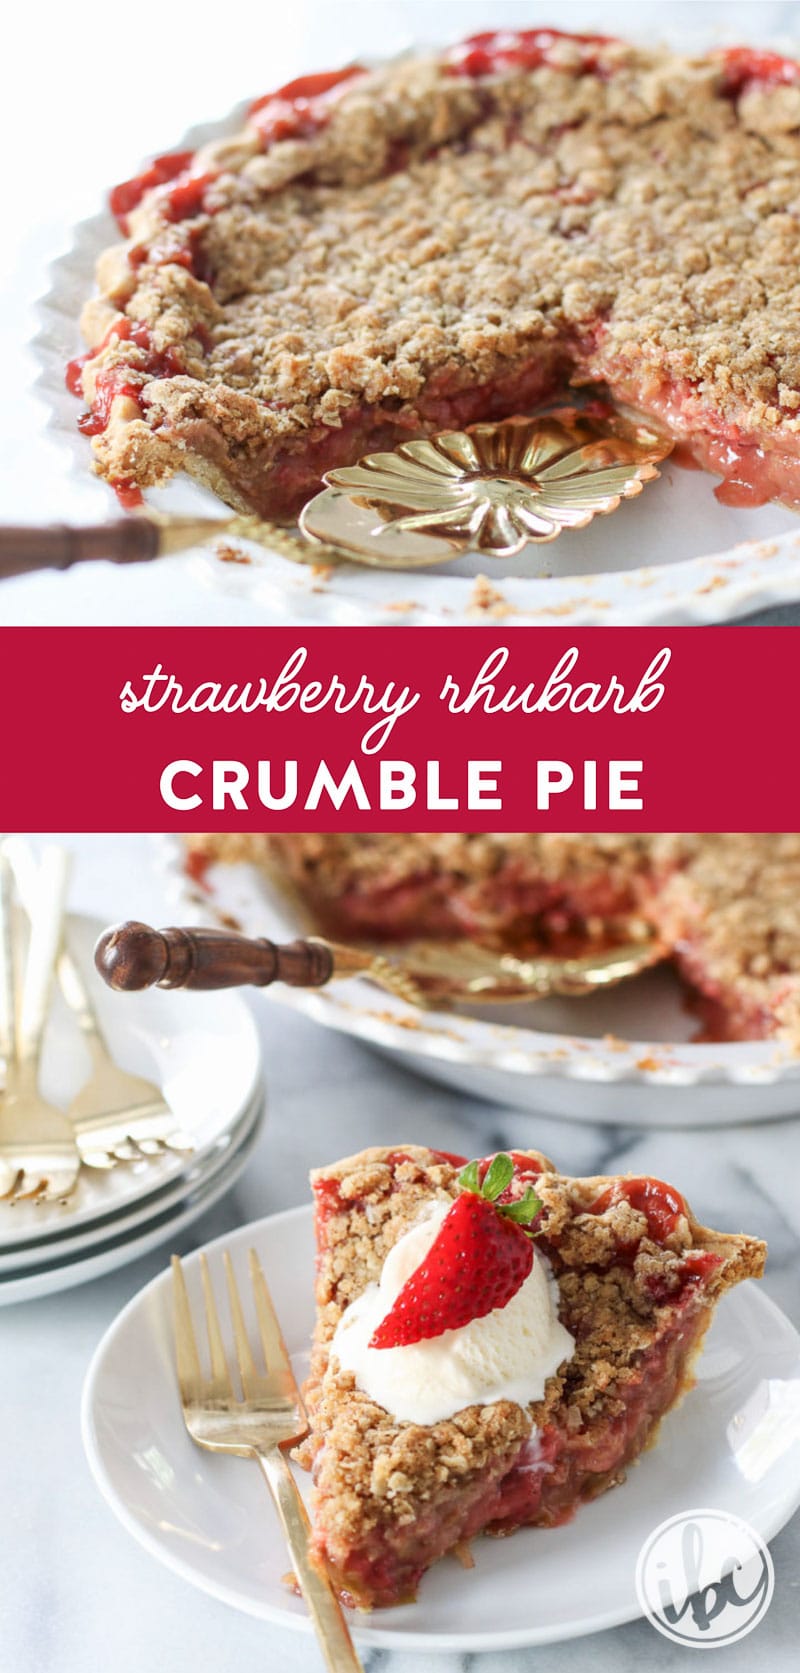 Loaded with fresh #strawberry and #rhubarb this Strawberry Rhubarb Crumble #Pie #recipe makes the perfect #summer dessert #recipe.